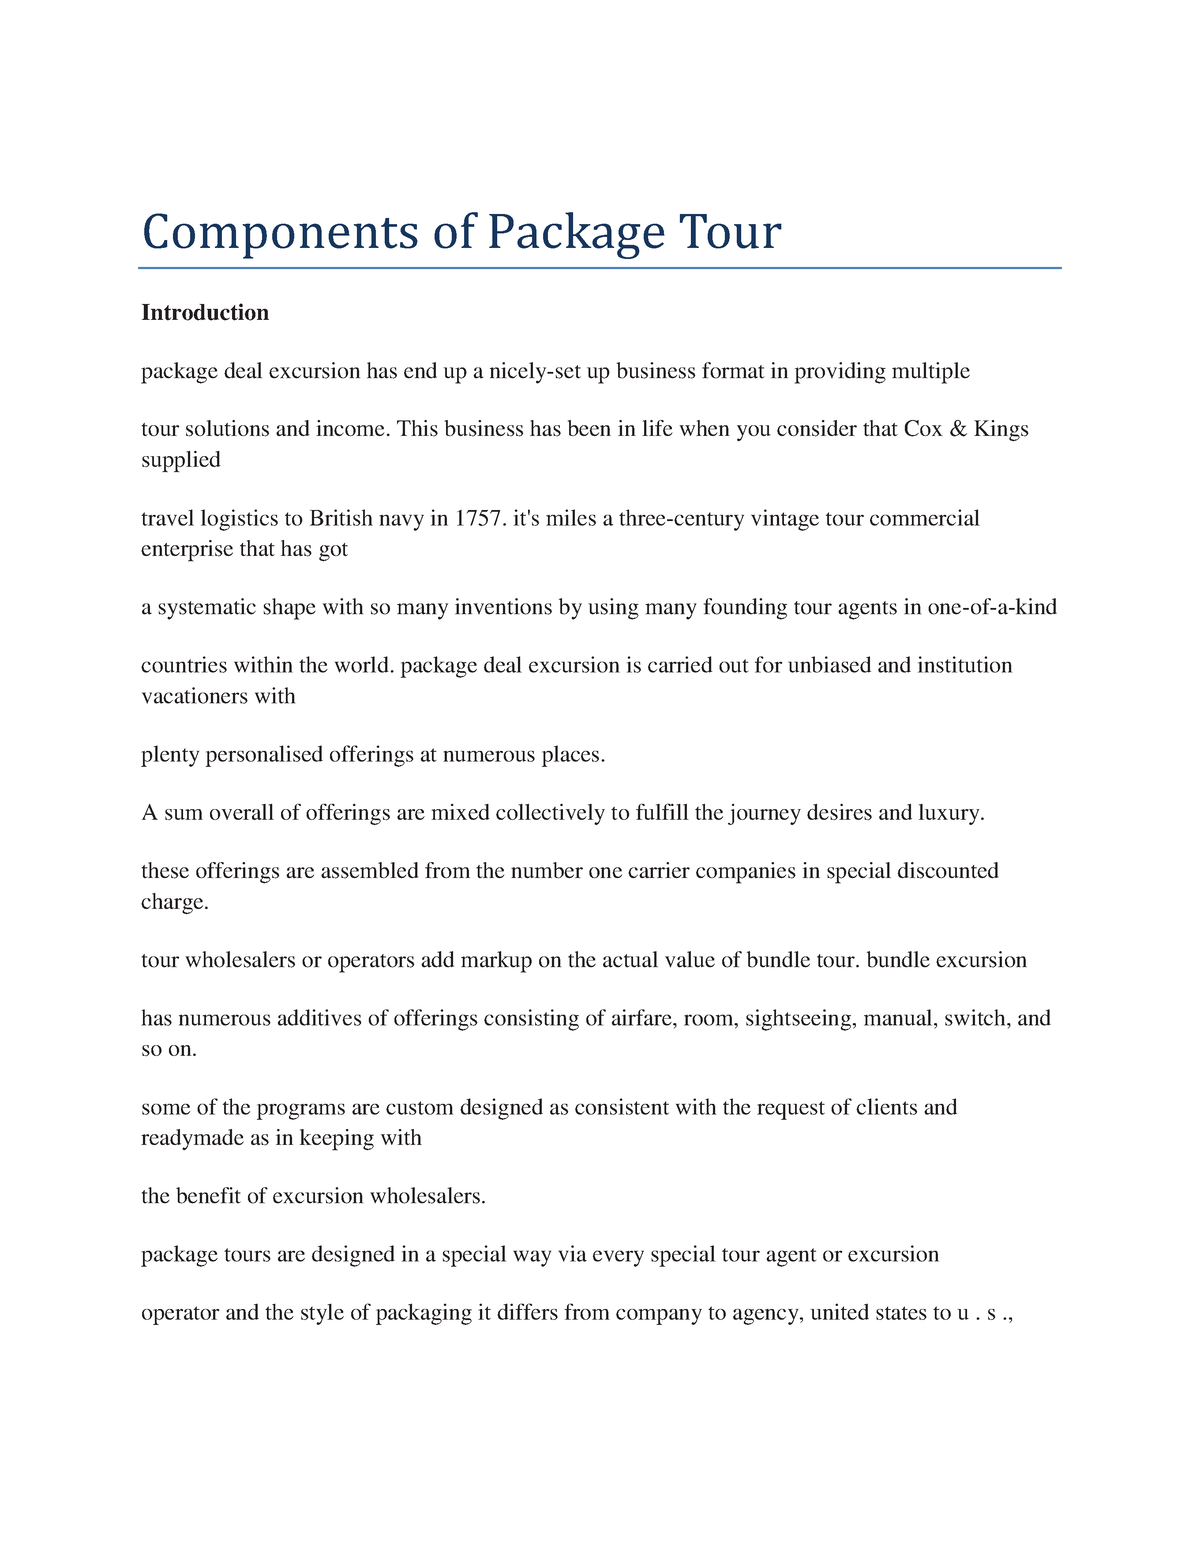 package tour components